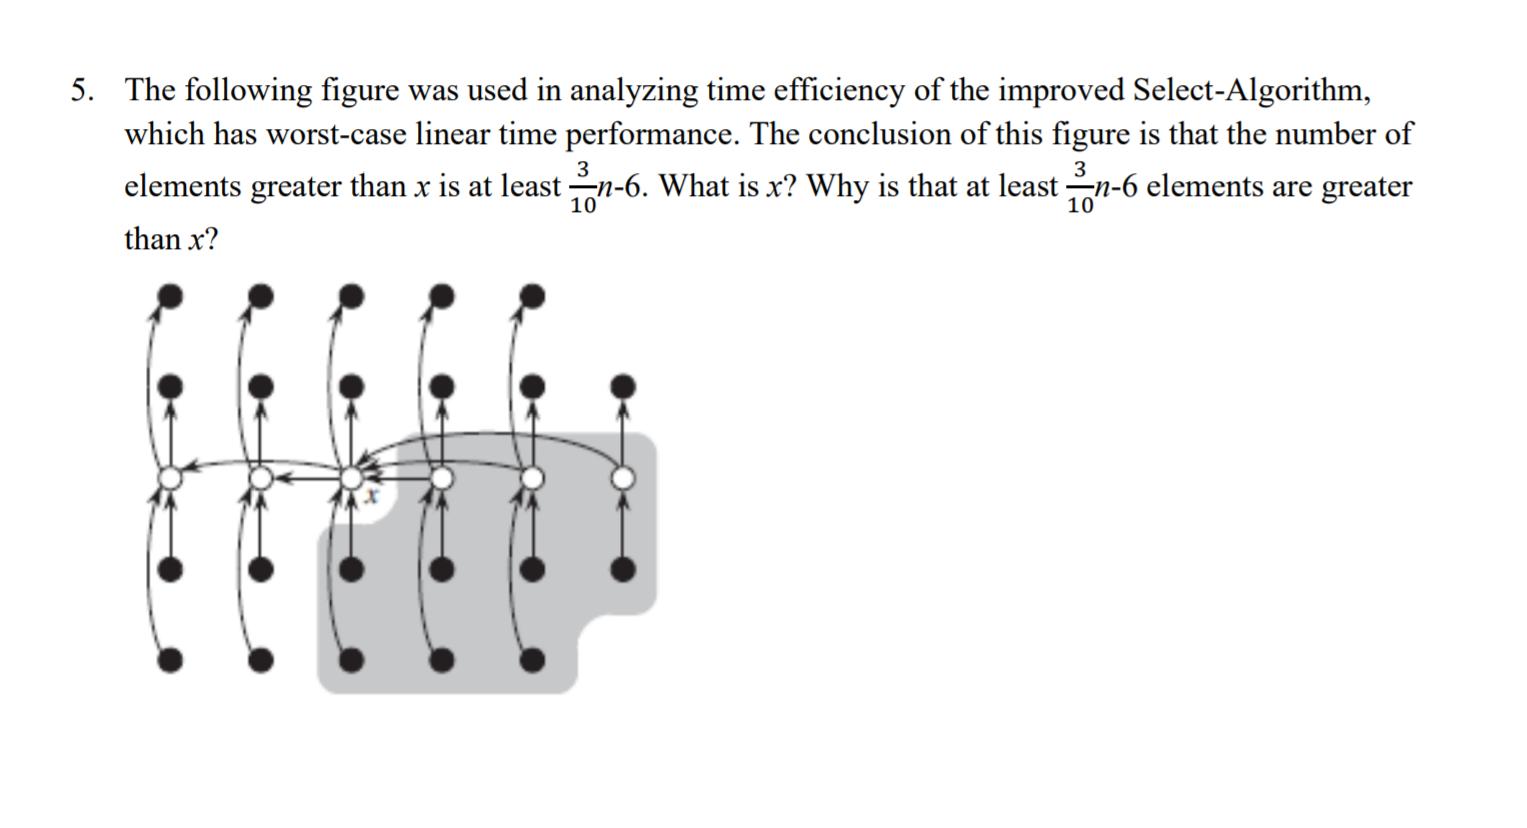 5. The following figure was used in analyzing time efficiency of the improved Select-Algorithm, which has